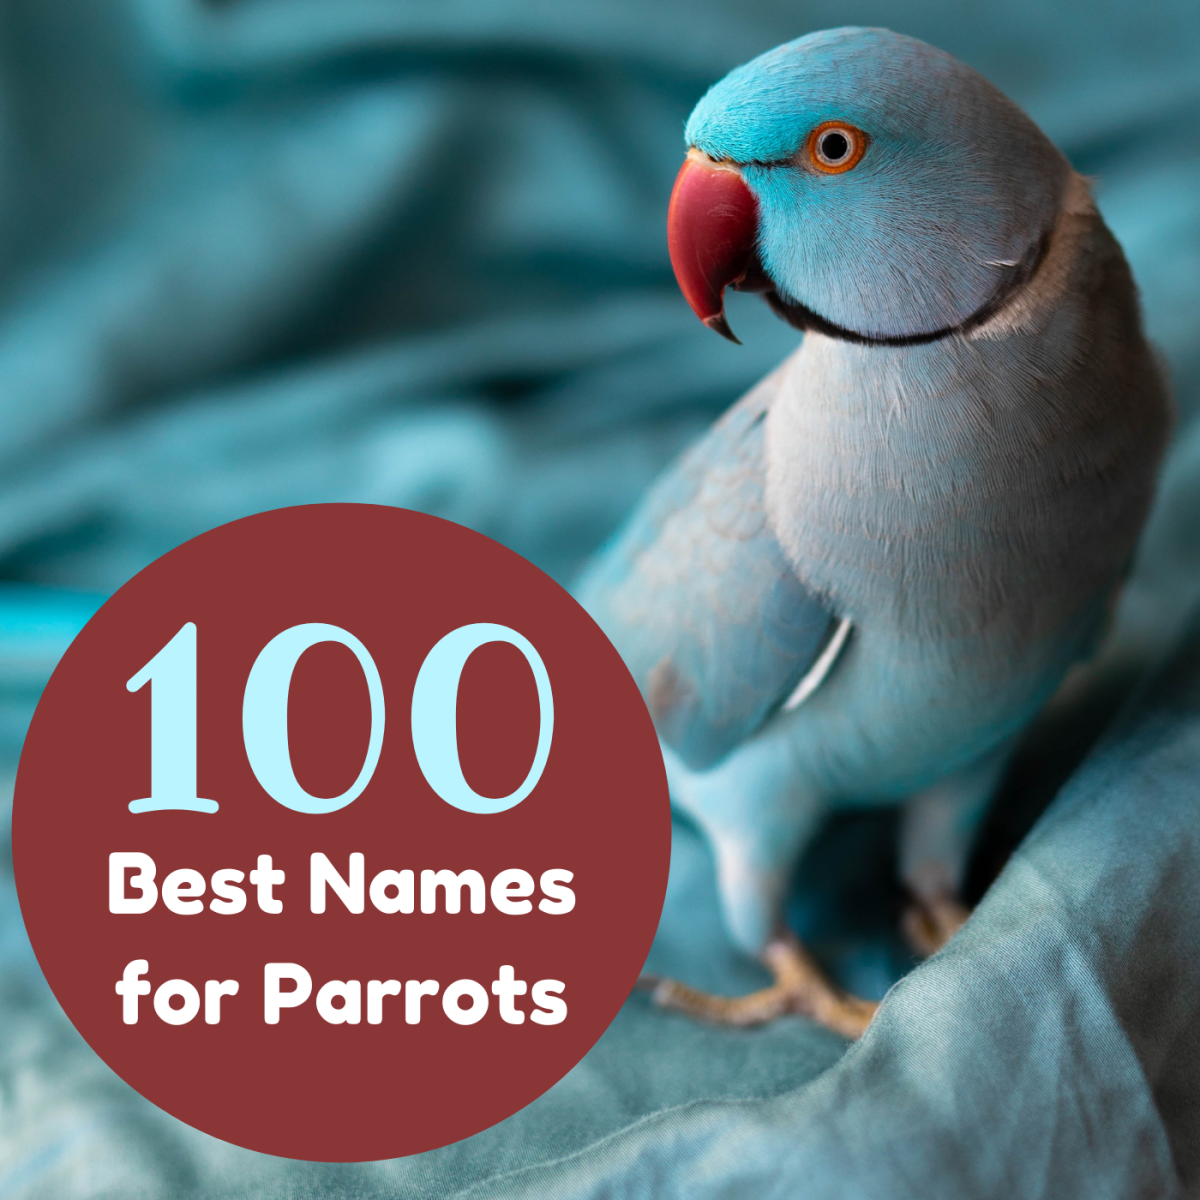 What Are Good Parrot Names? 100 Name Ideas for Macaws and More